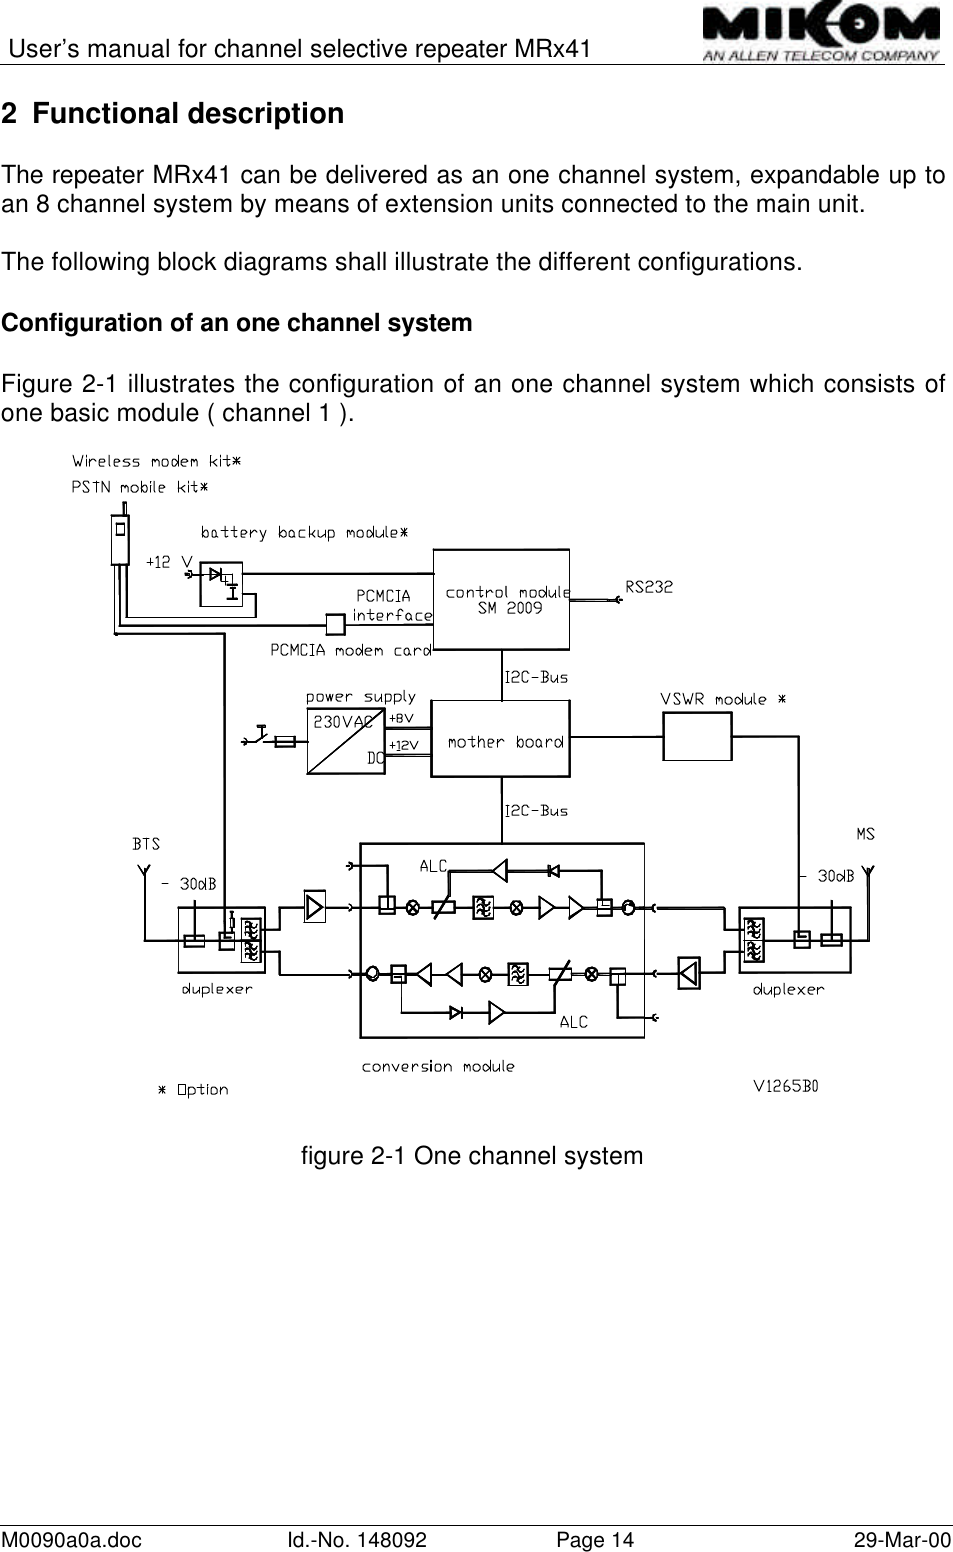 User’s manual for channel selective repeater MRx41M0090a0a.doc Id.-No. 148092 Page 14 29-Mar-002 Functional descriptionThe repeater MRx41 can be delivered as an one channel system, expandable up toan 8 channel system by means of extension units connected to the main unit.The following block diagrams shall illustrate the different configurations.Configuration of an one channel systemFigure 2-1 illustrates the configuration of an one channel system which consists ofone basic module ( channel 1 ).figure 2-1 One channel system